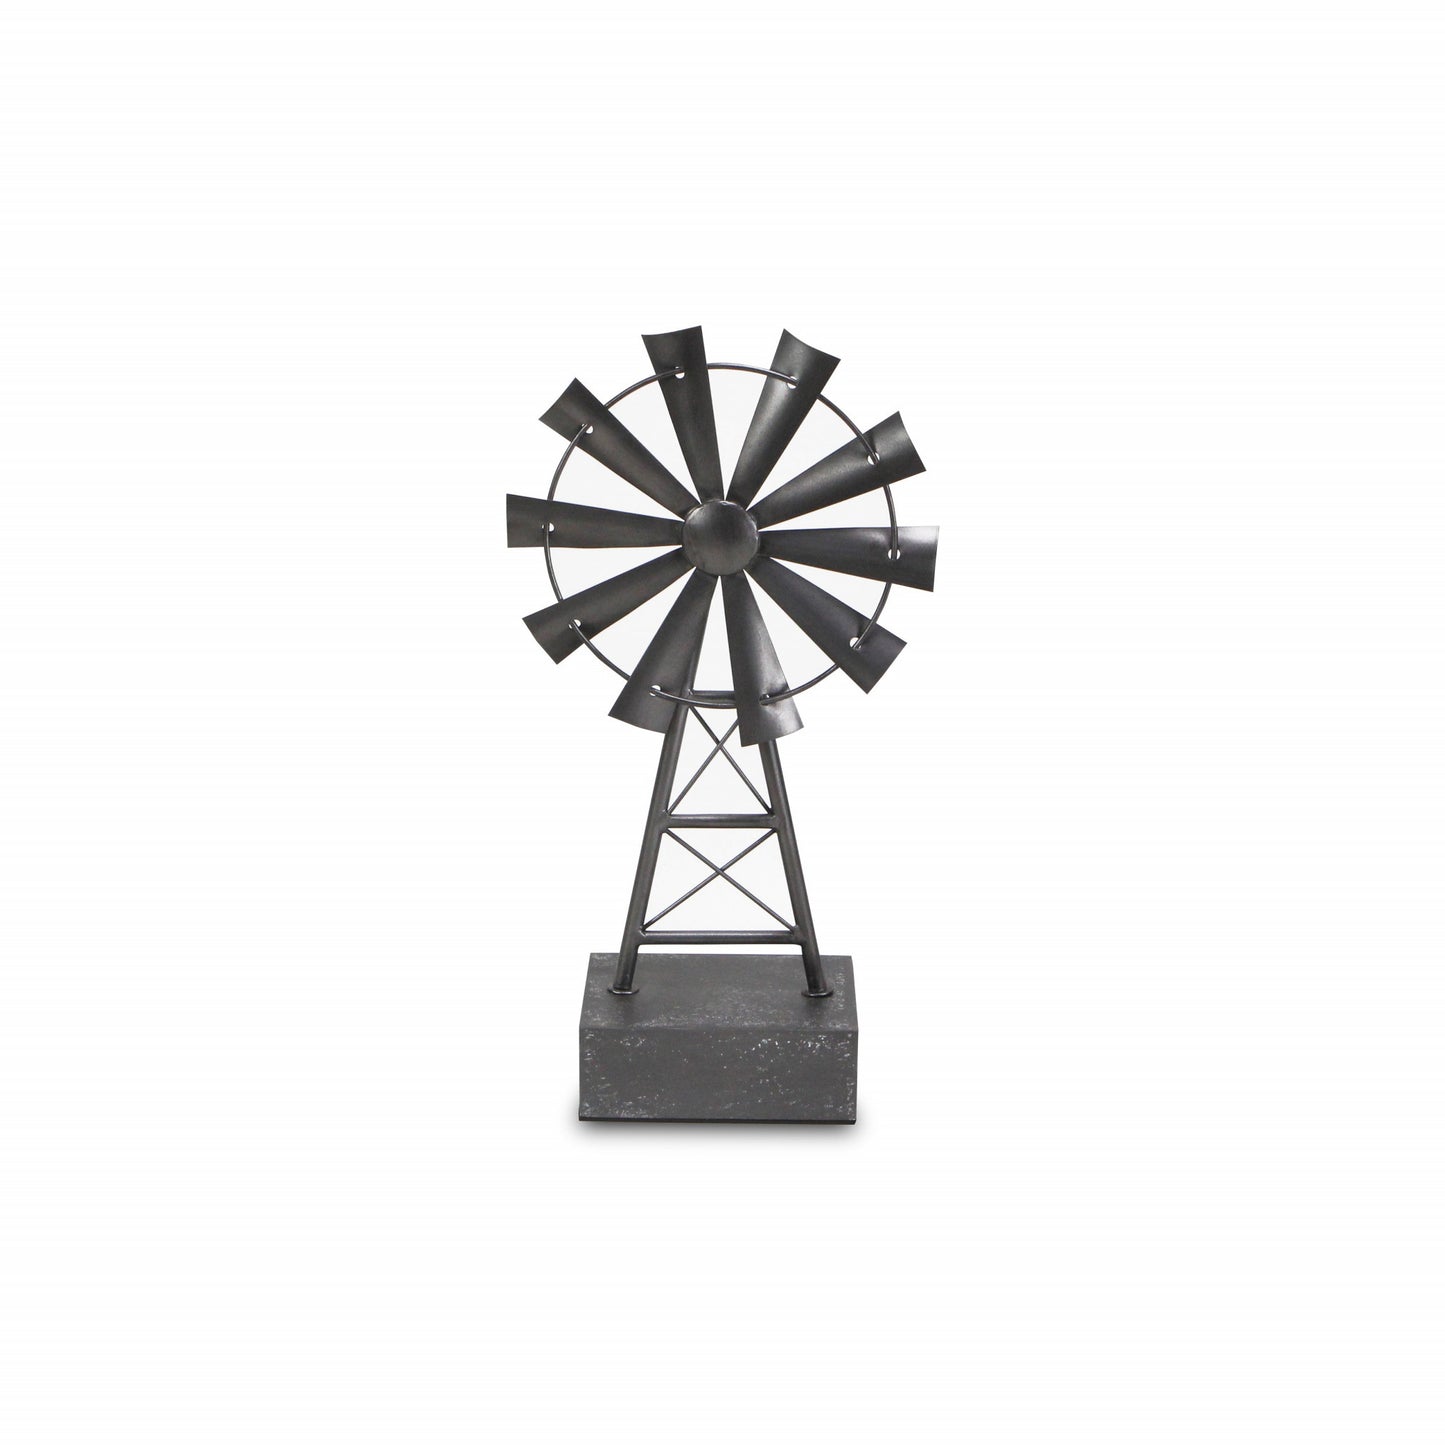 17" Gray Metal Windmill Hand Painted Sculpture